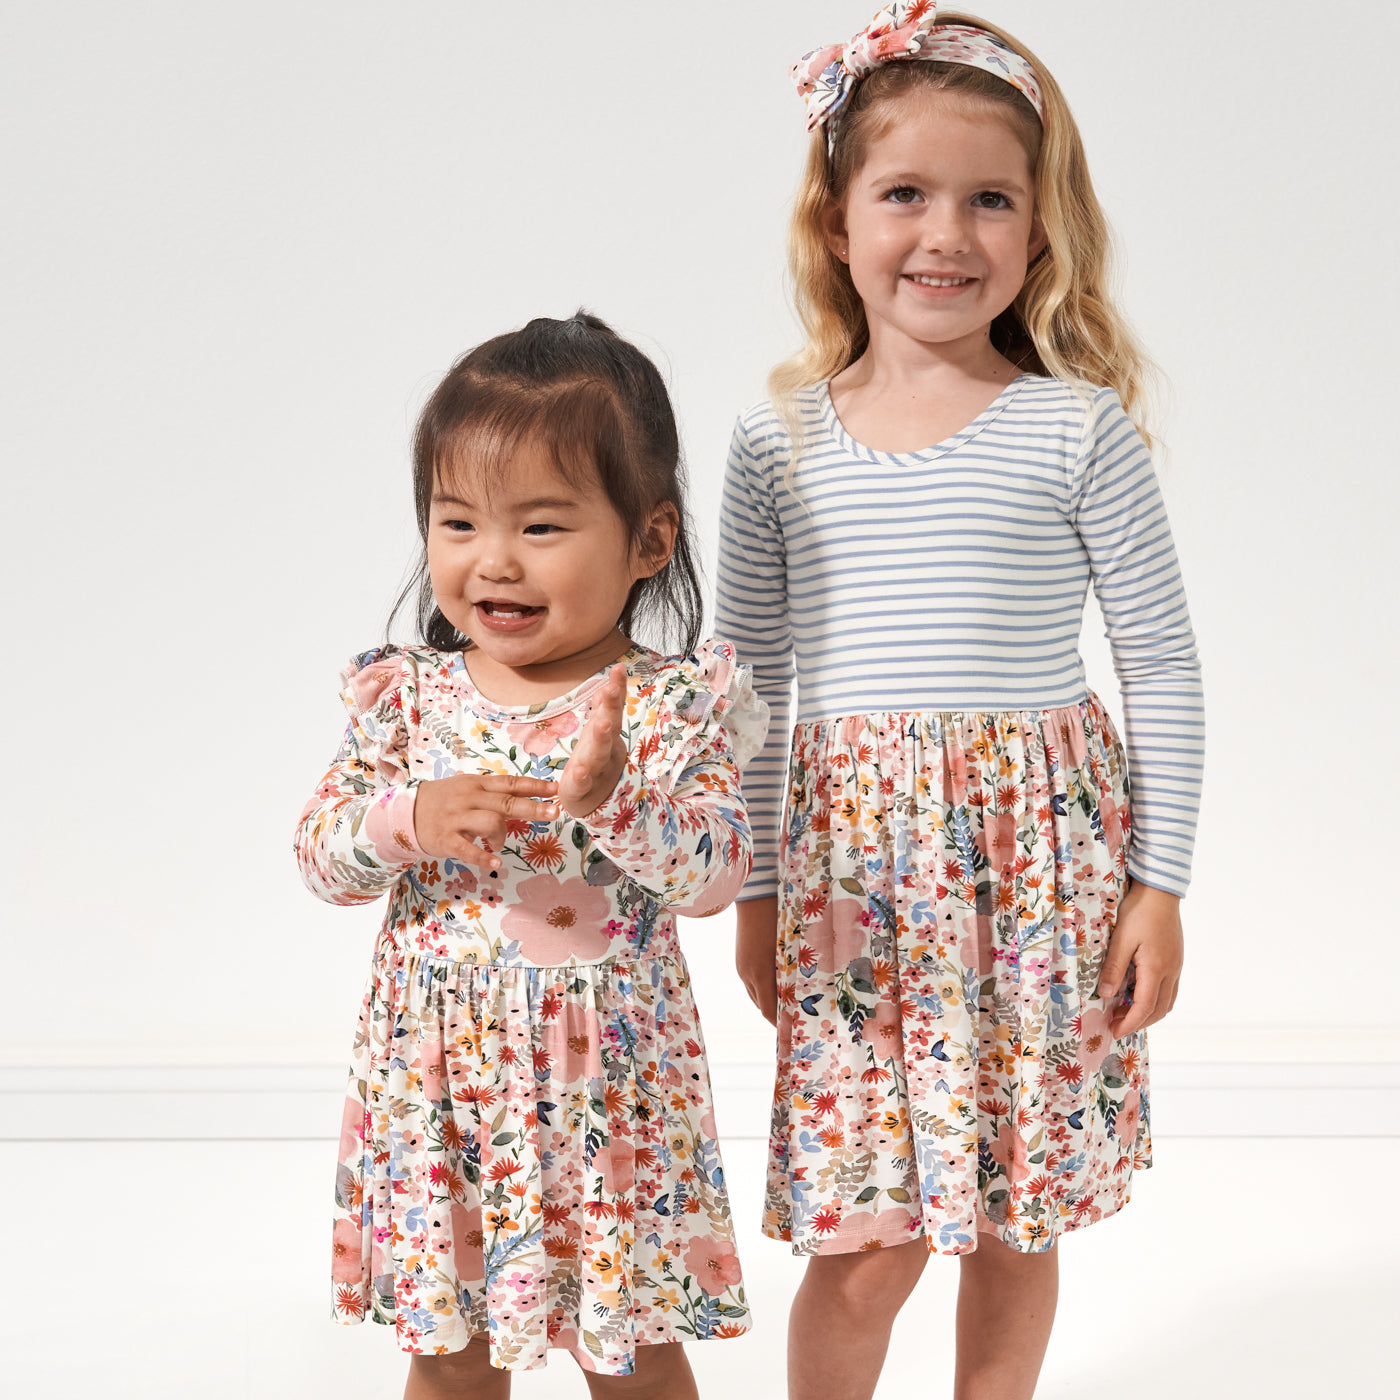 Two children posing together wearing Little Sleepies play styles. One child is wearing a Mauve Meadow printed twirl dress with bodysuit, the other child is wearing a Mauve Meadow and Ivory and Fog Striped twirl dress paired with a matching Mauve Meadow luxe bow headband